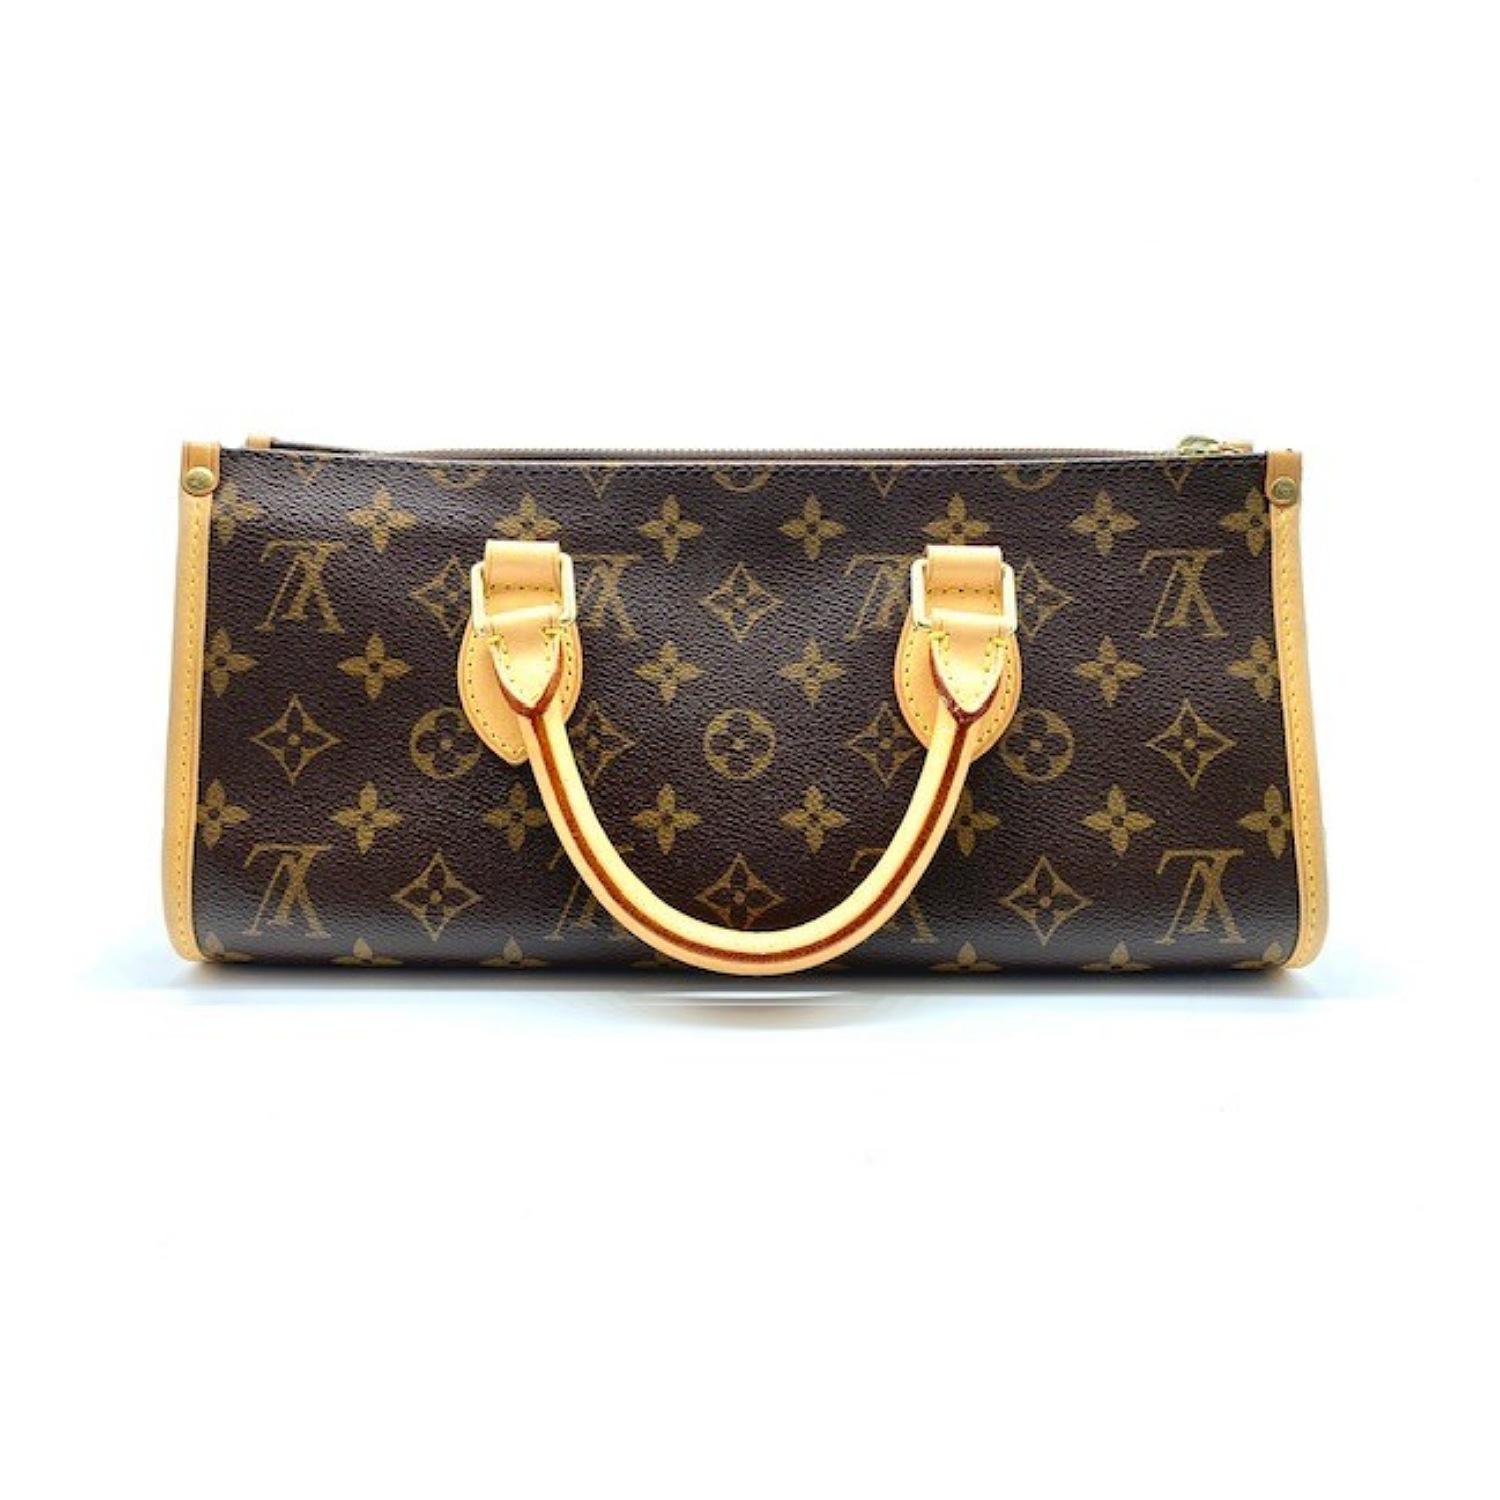 The chic handbag is crafted of traditional Louis Vuitton monogram coated canvas. This is complemented with vachetta cowhide leather trim and rolled leather top handles. The bag has brass hardware including an overhanging zipper that opens to a